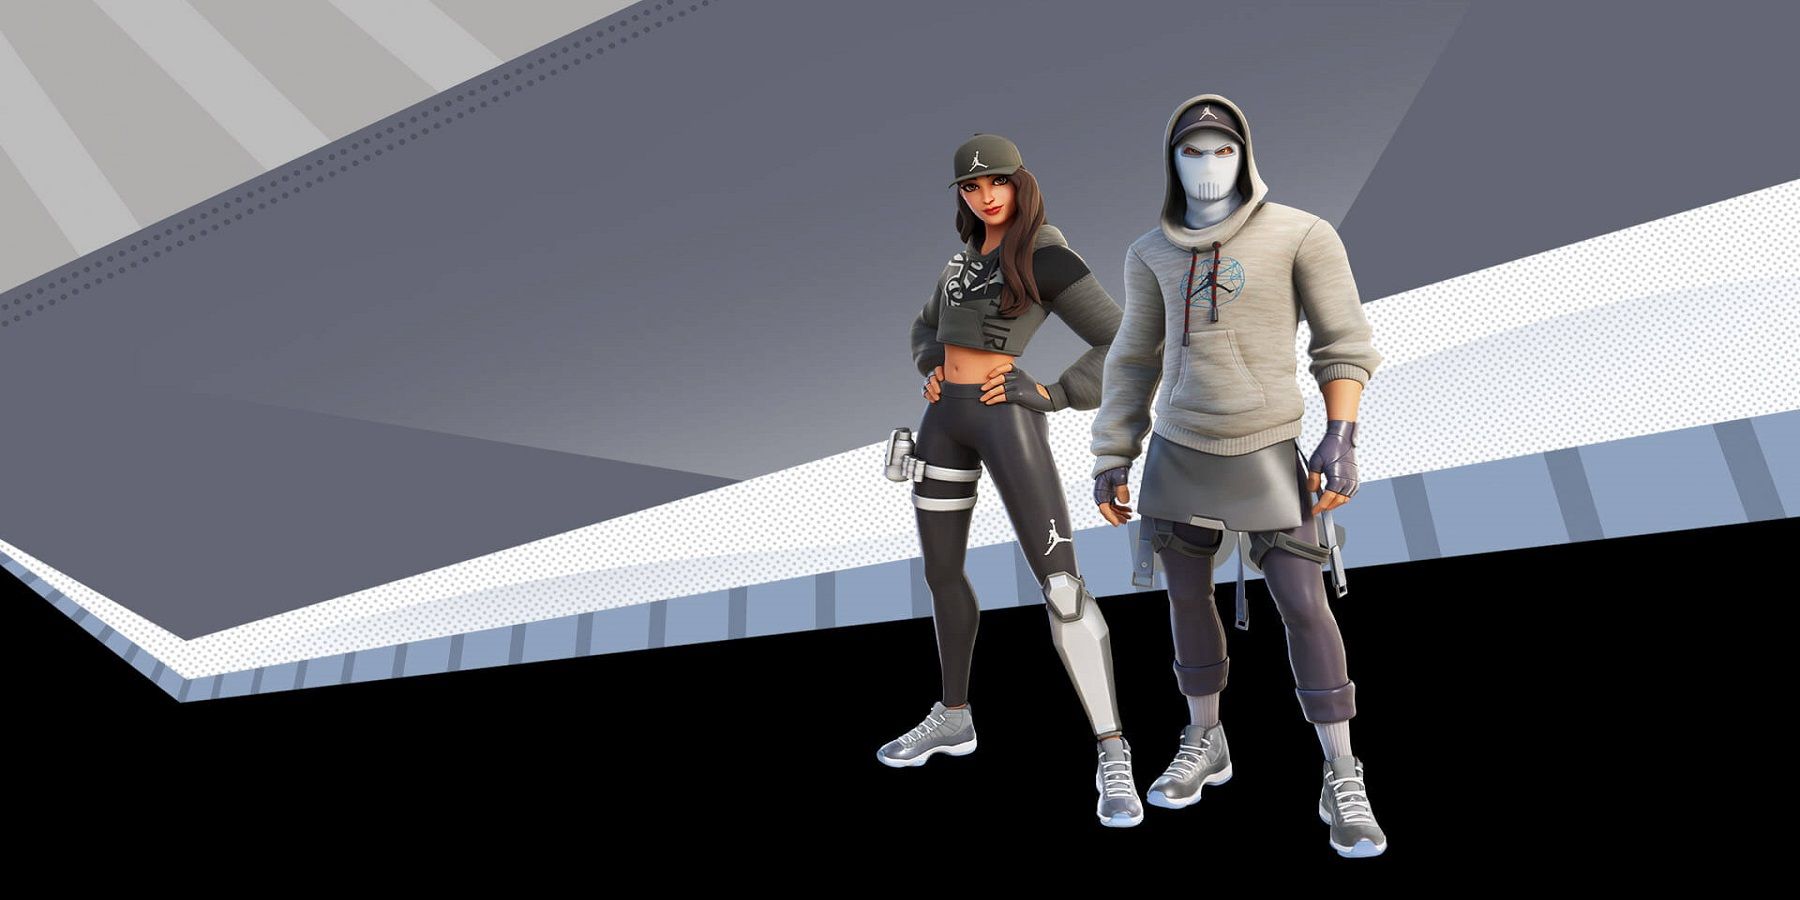 Fortnite is celebrating the third release of the Air Jordan 11 Cool Grey shoes.